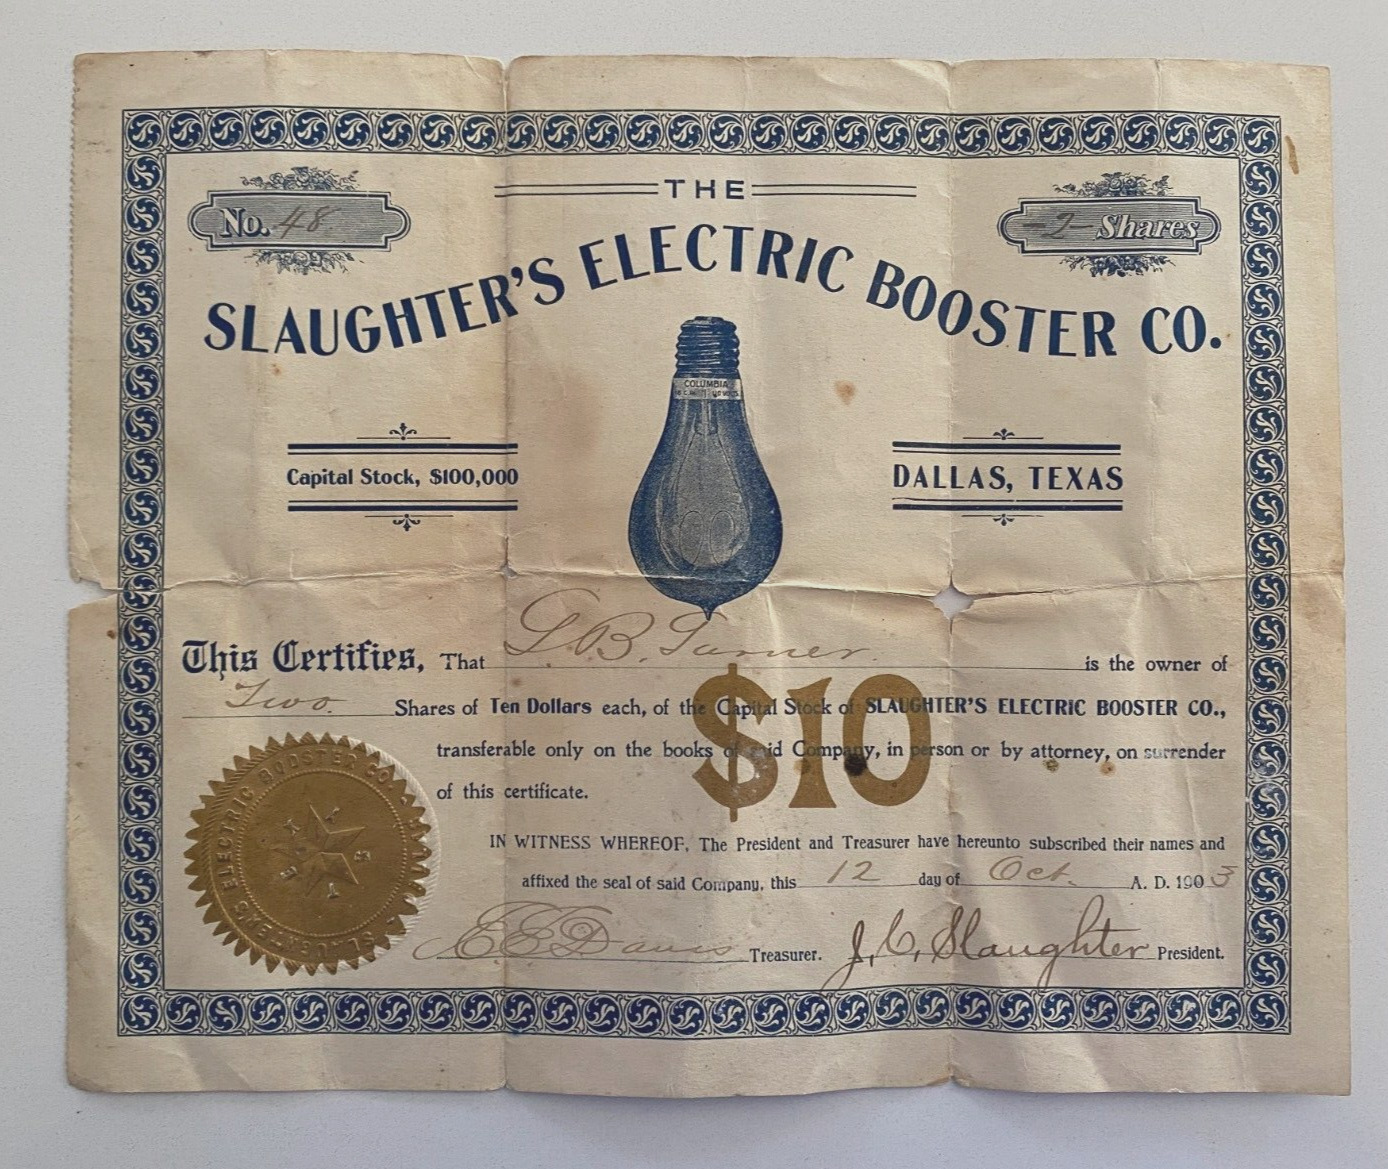 RARE 1903 DALLAS TX SLAUGHTER'S ELECTRIC BOOSTER CO. STOCK CERTIFICATE / SIGNED